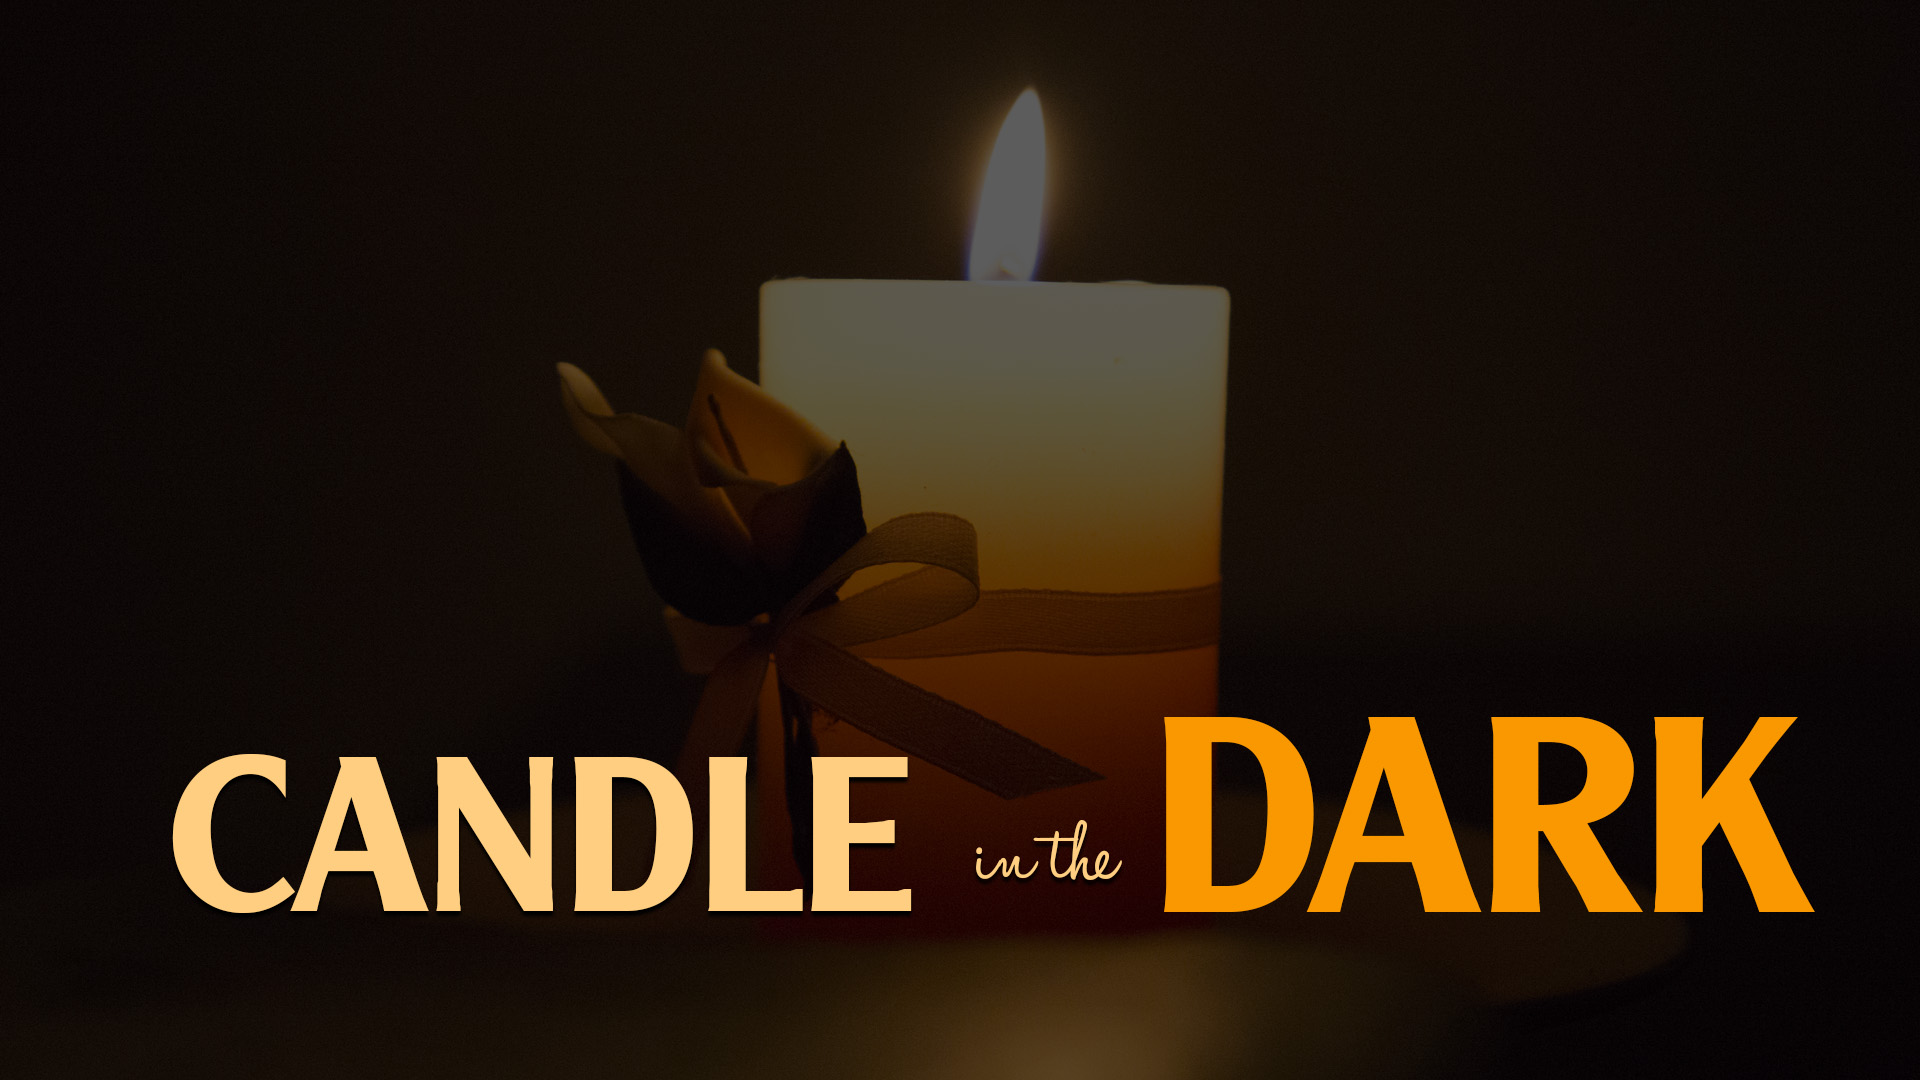 01. Candle in the Dark